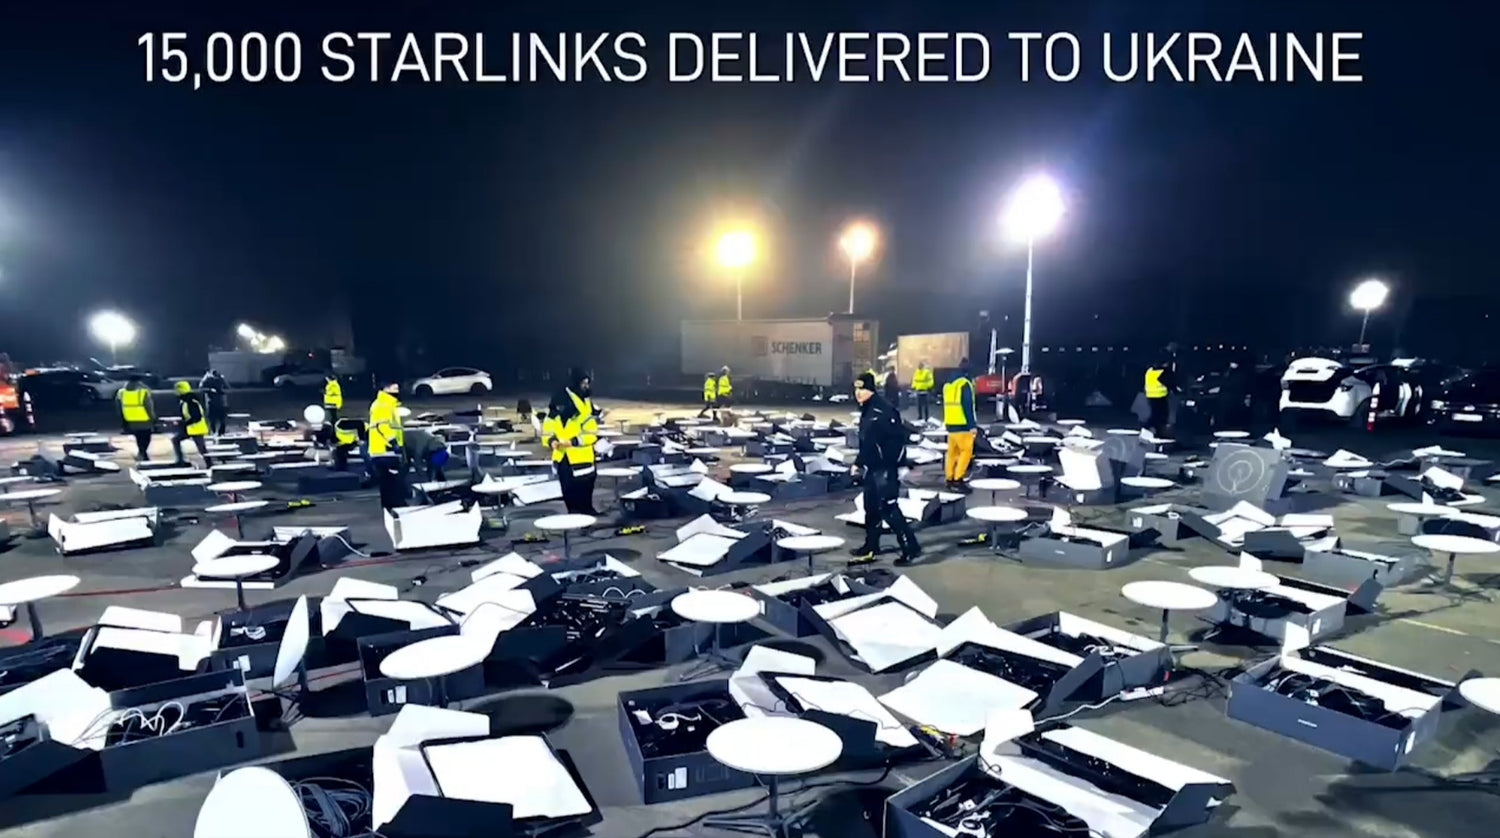 SpaceX delivered a total of 15,000 Starlink terminals to Ukraine amid the Russia war